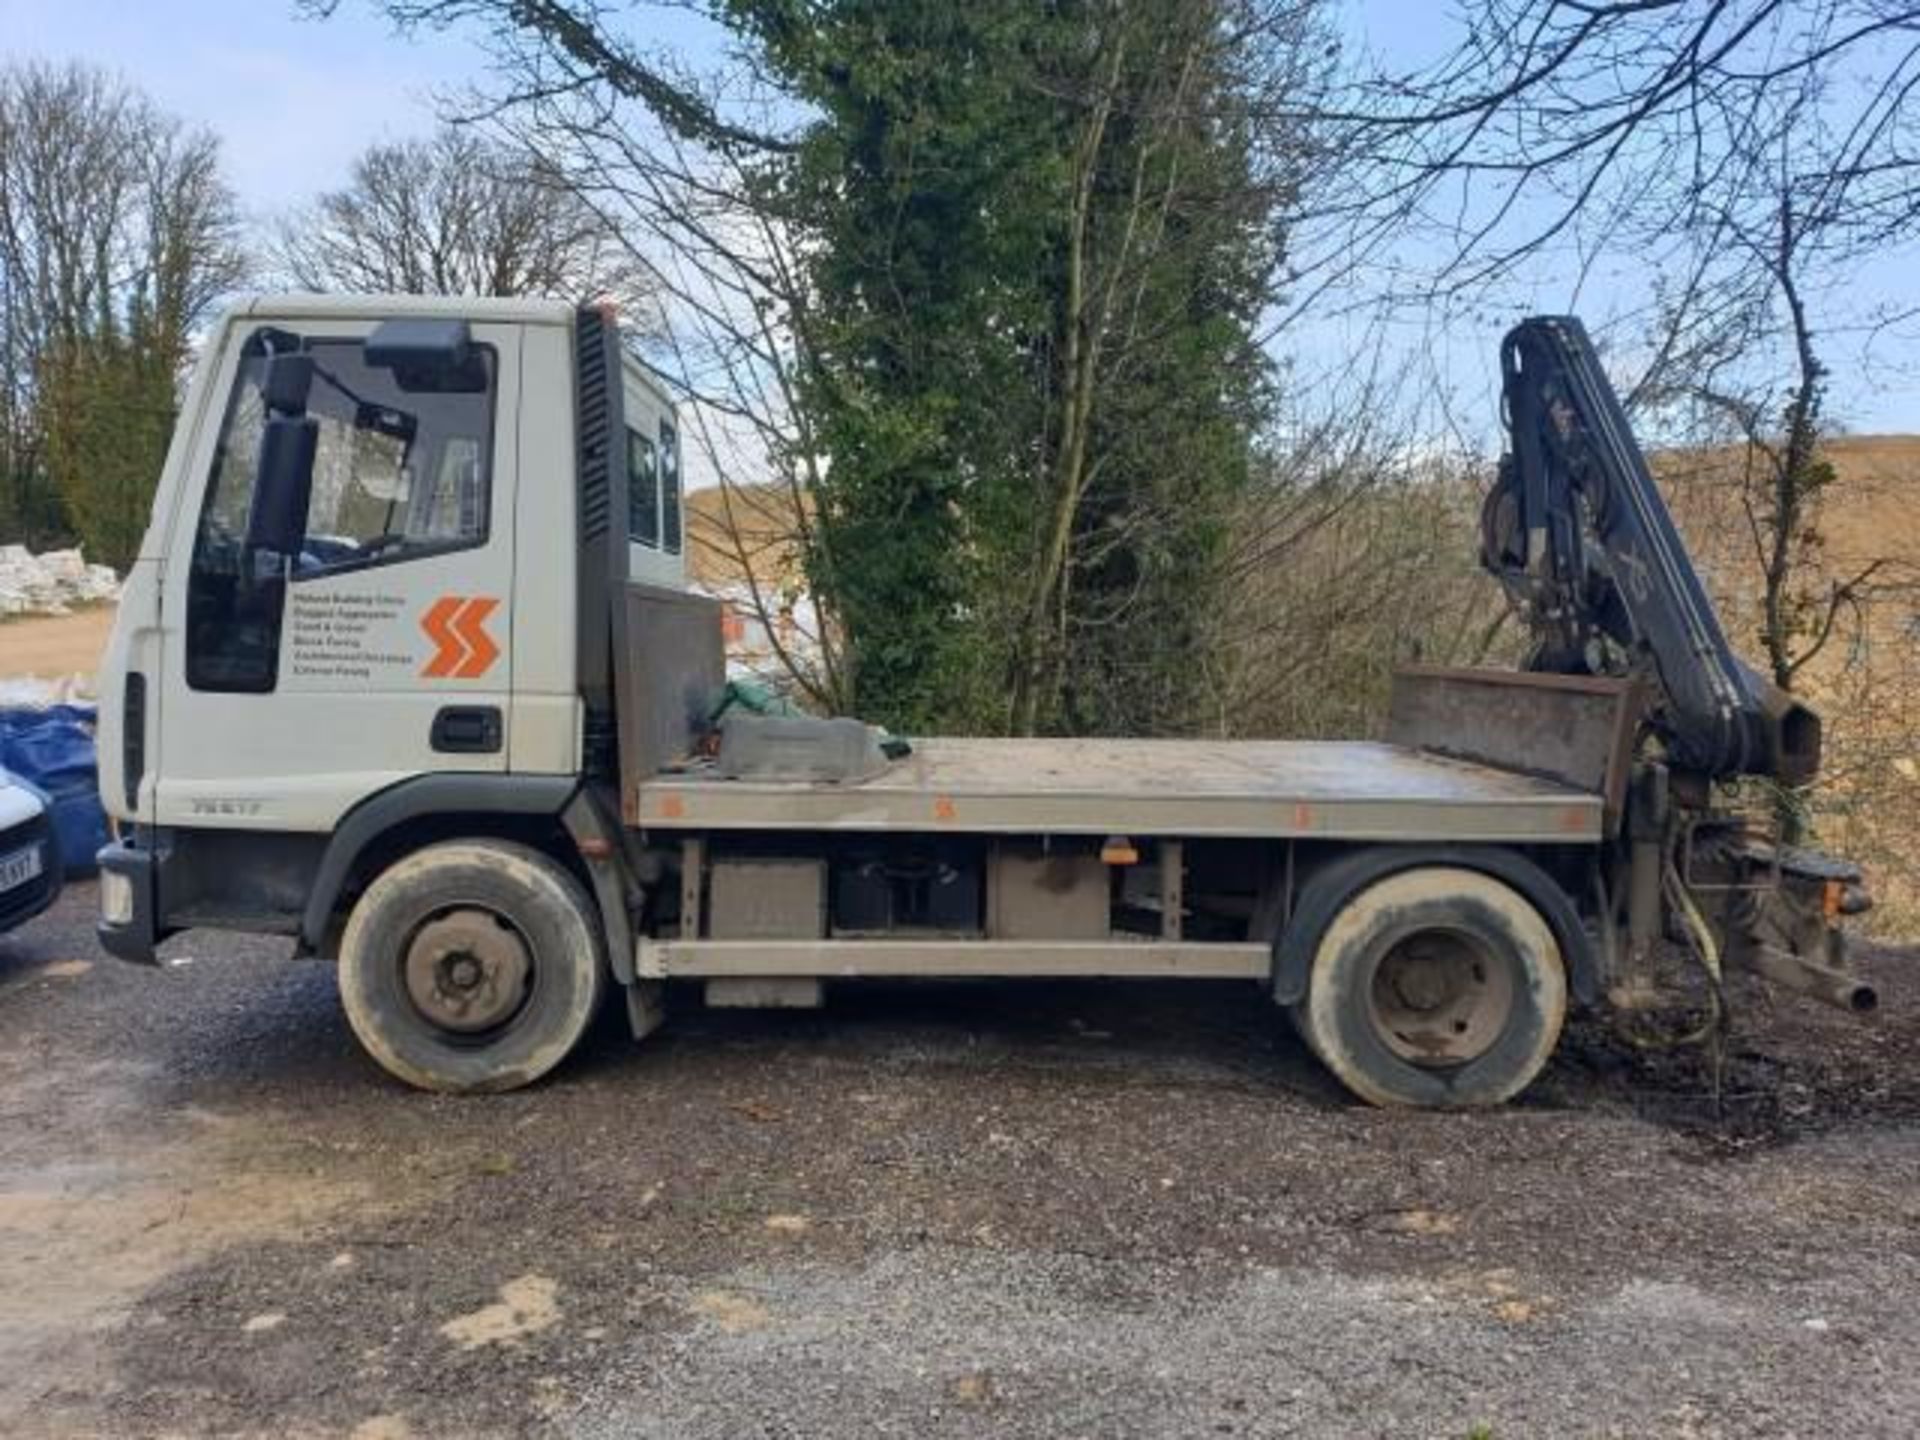 Iveco Euro Cargo 75 E17, Registration HX55 LGC – V5 Document (no keys or batteries) with Hiab XS 055 - Image 3 of 12